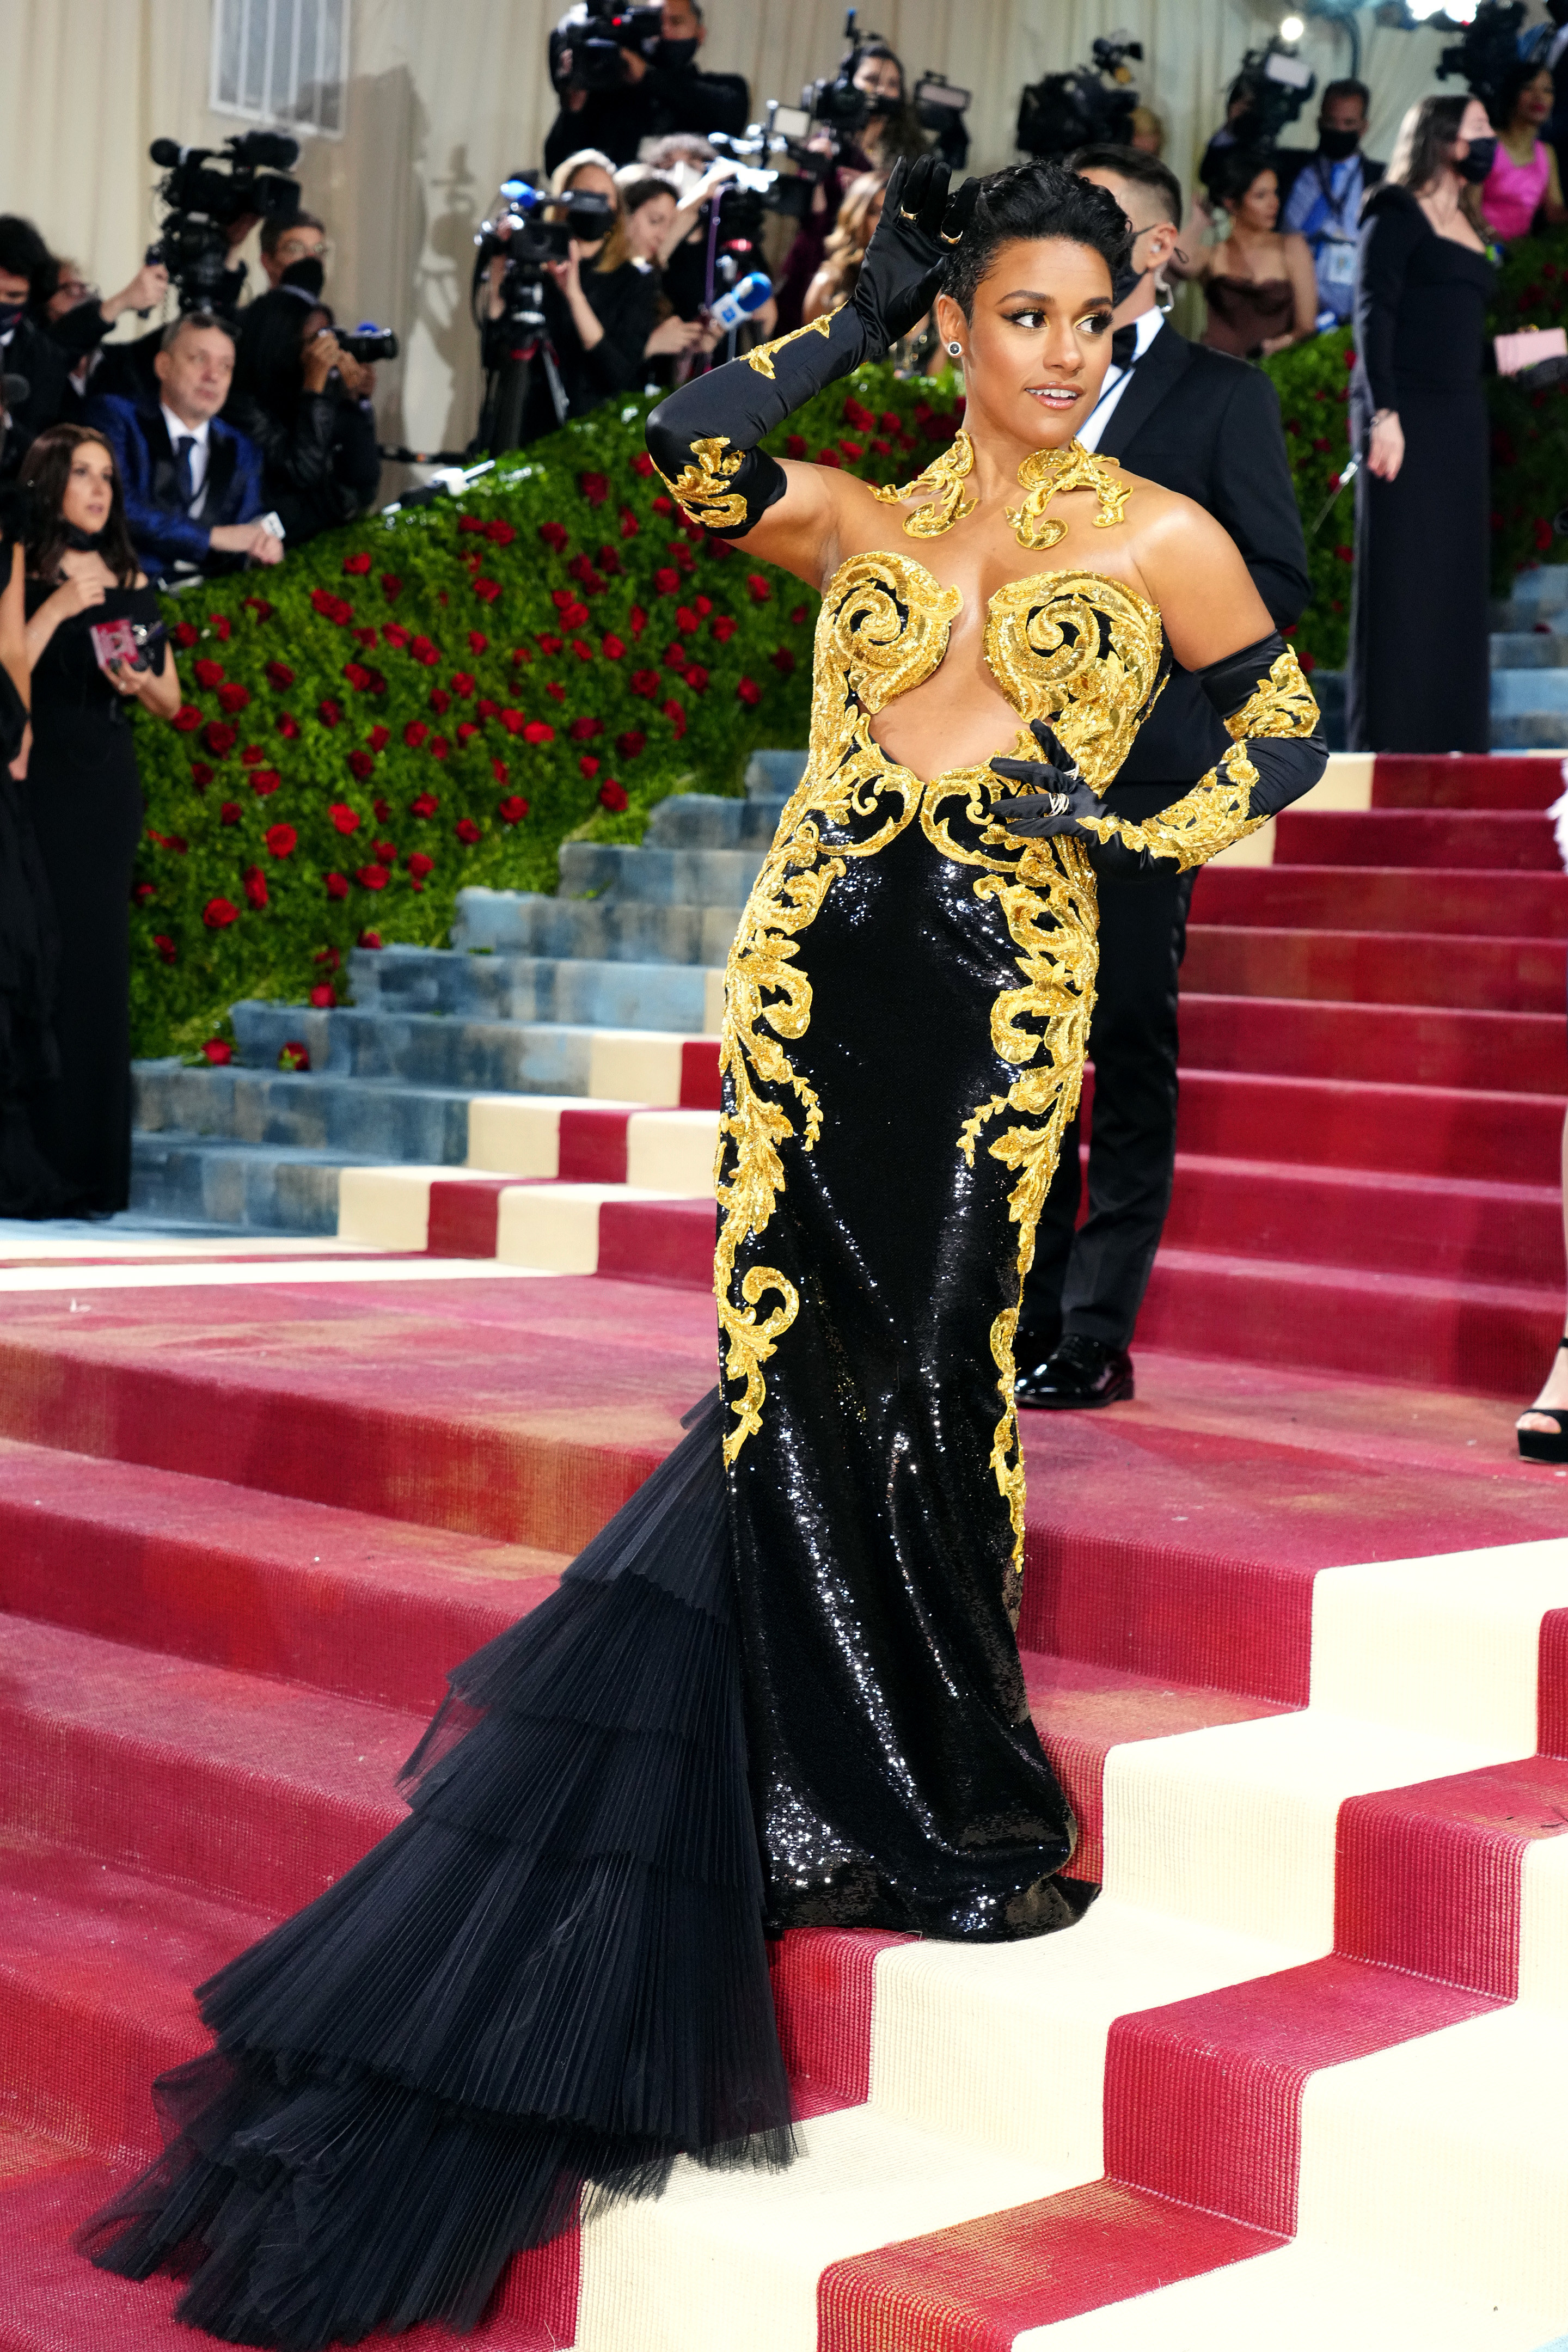 Ariana in a long gown with gold accents, layered train, and matching arm-length gloves